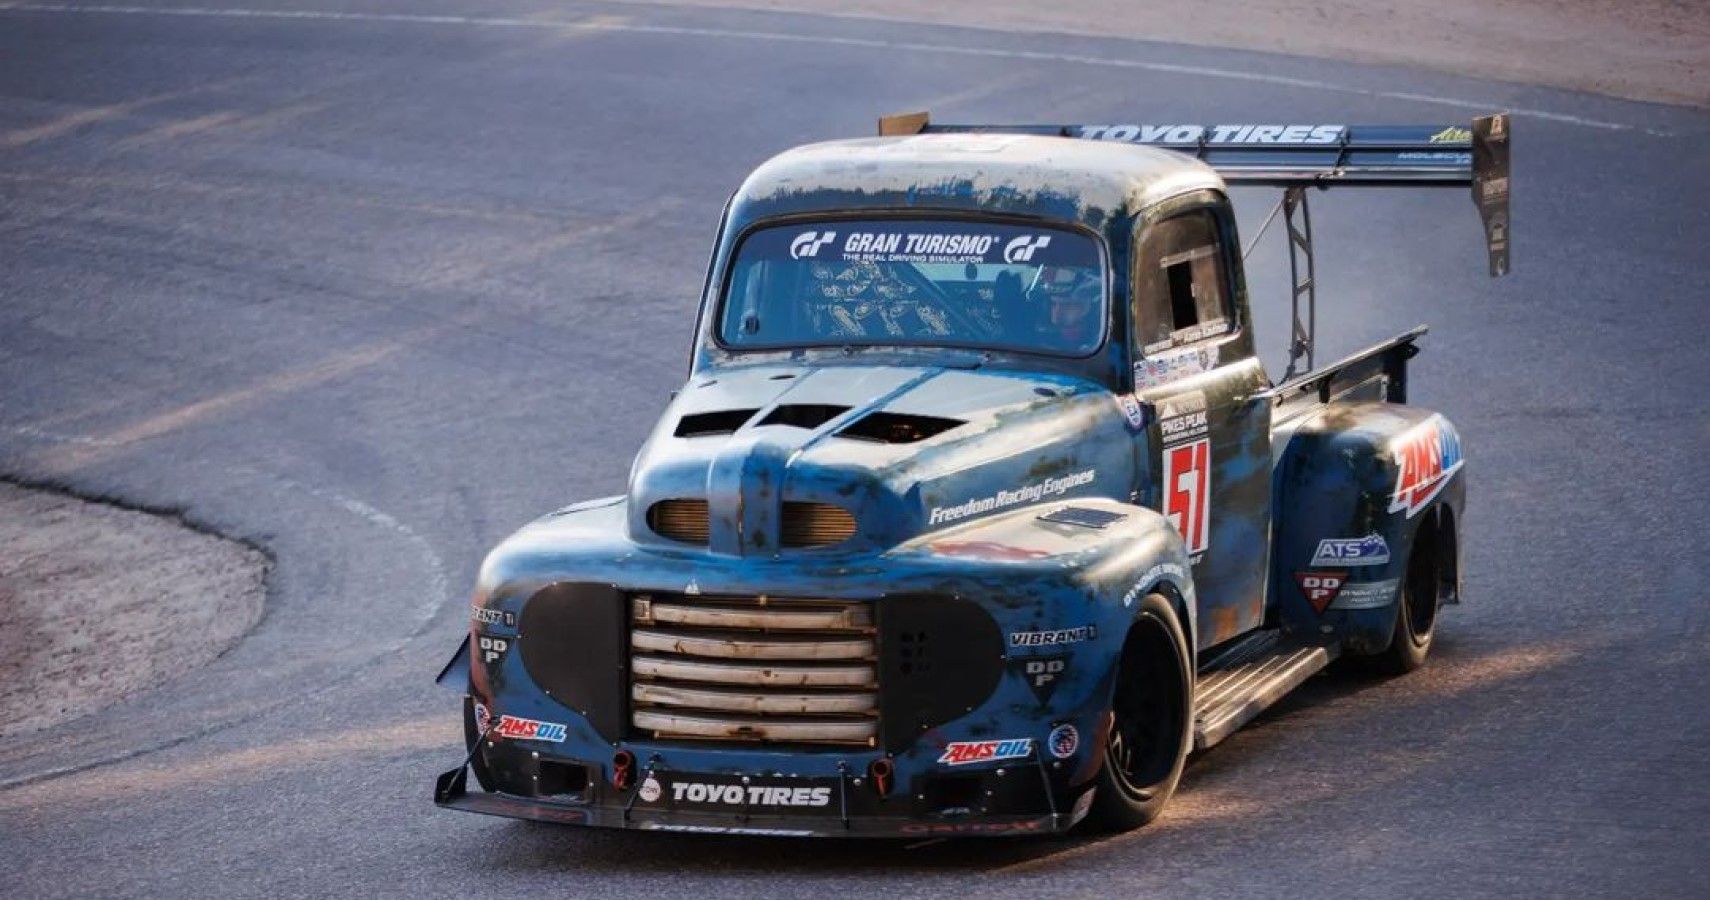 Check Out This Monster Ford F1 Race Truck That Aaron Kaufman Drove At